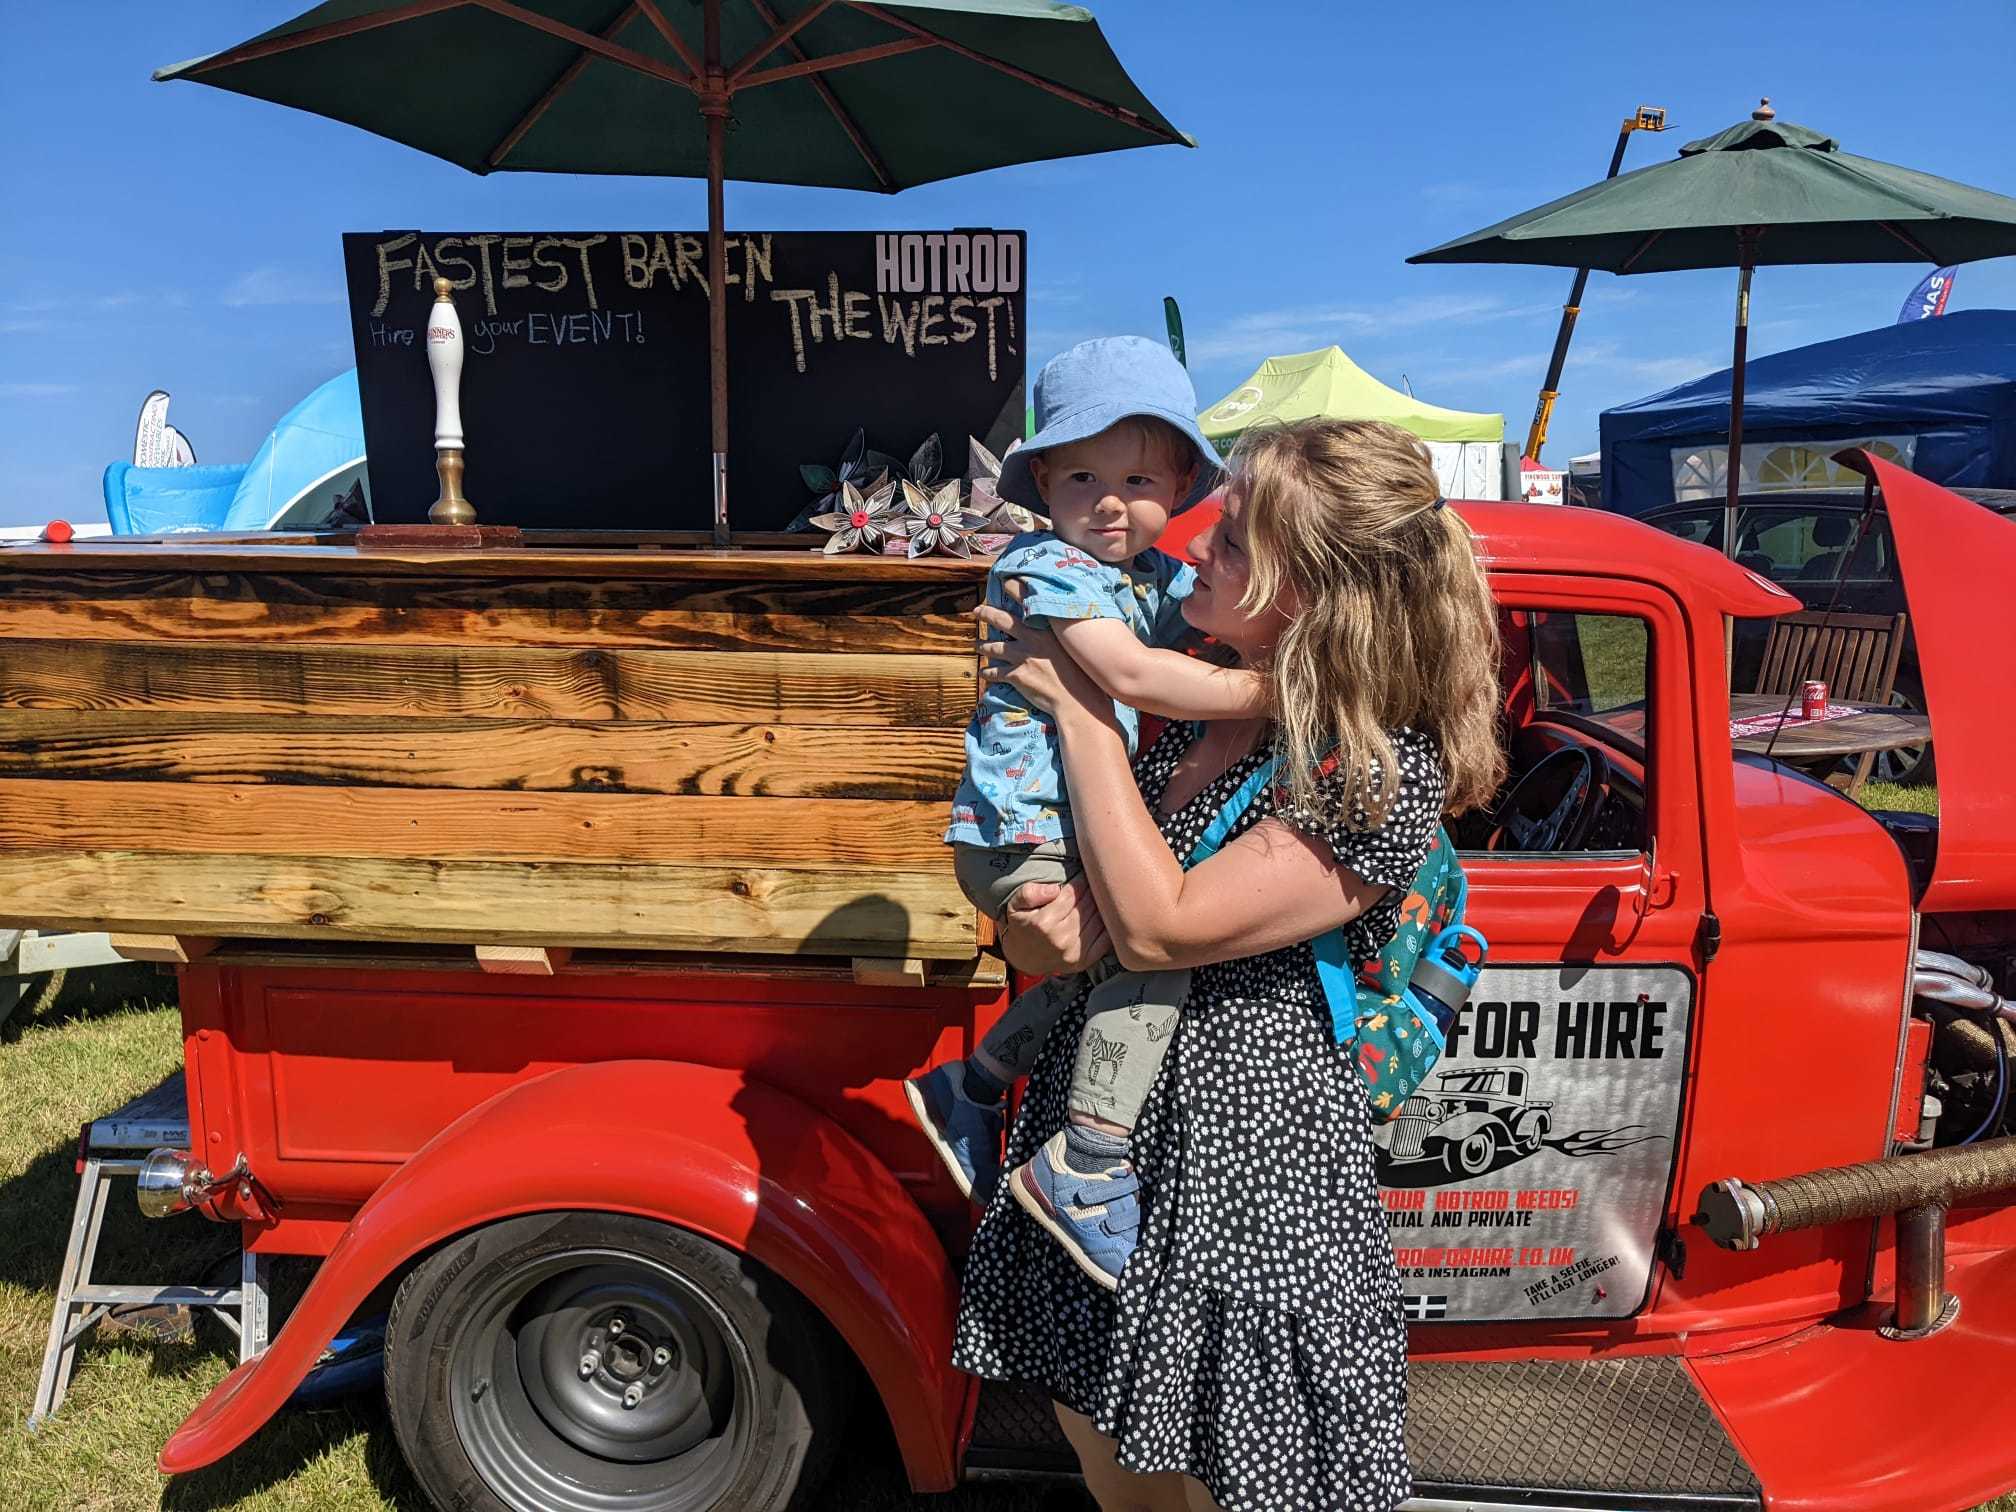 Little Alfie with his mum looking at this vintage hot rod